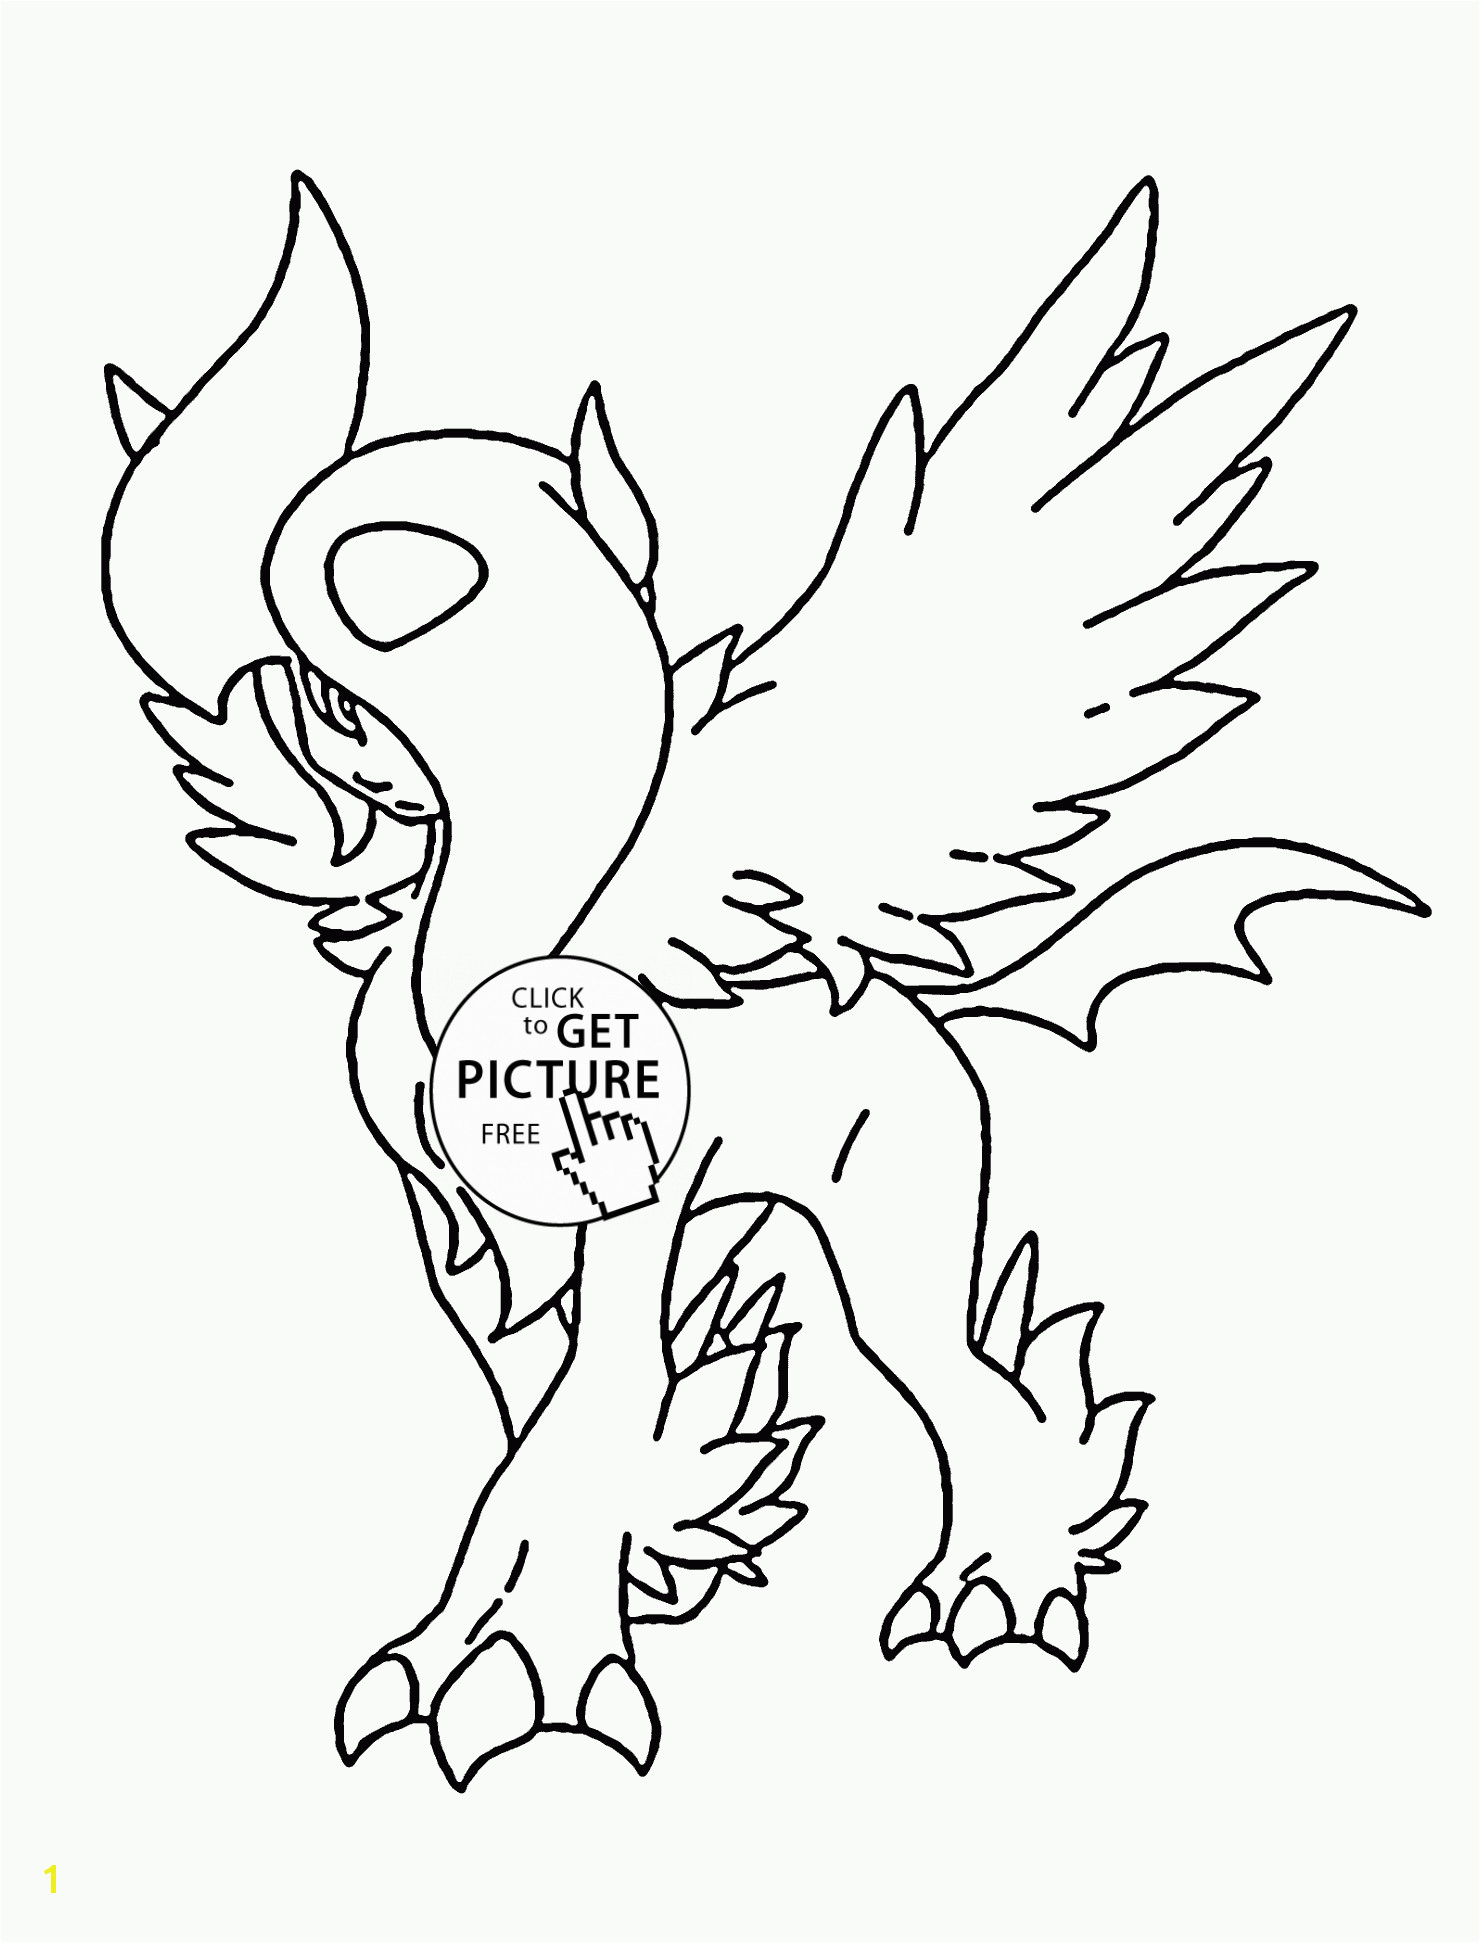 Mega Pokemon Coloring Pages Printable for Good New Pokemon Coloring 52 Inspirational Hydreigon Coloring Pages